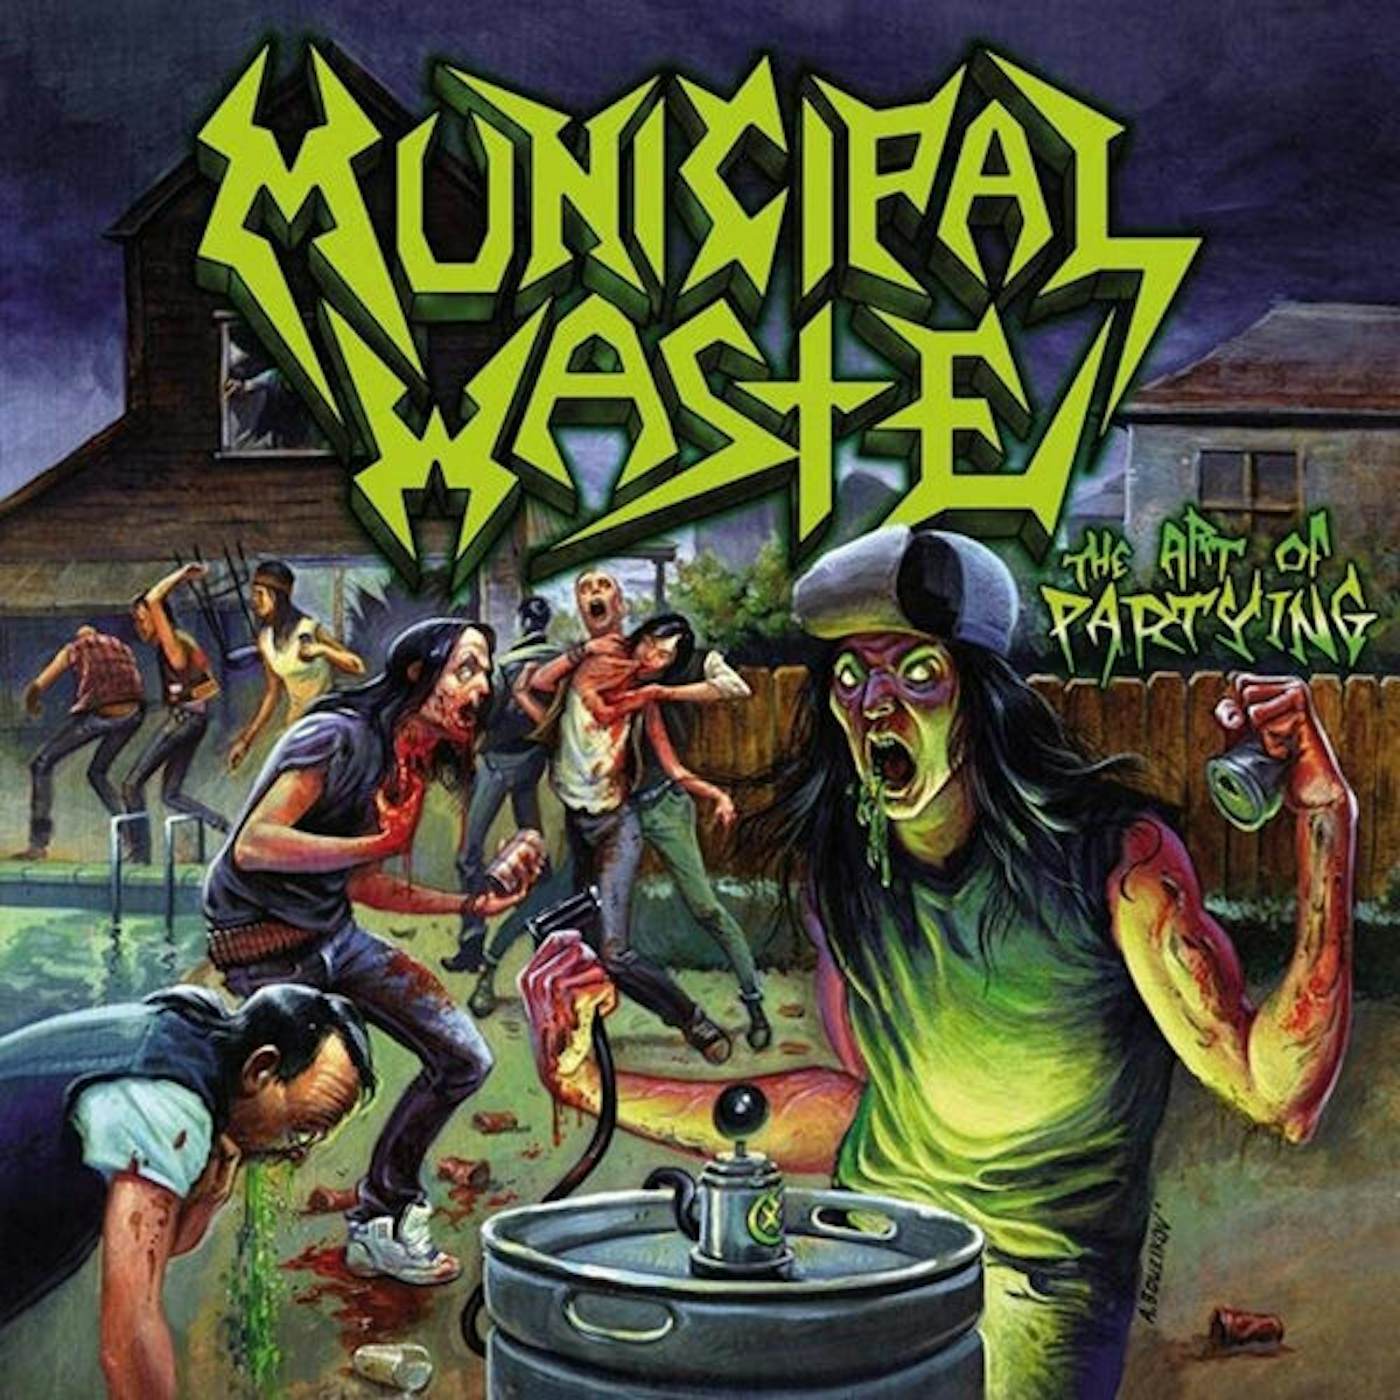 Municipal Waste "The Art Of Partying" 12"